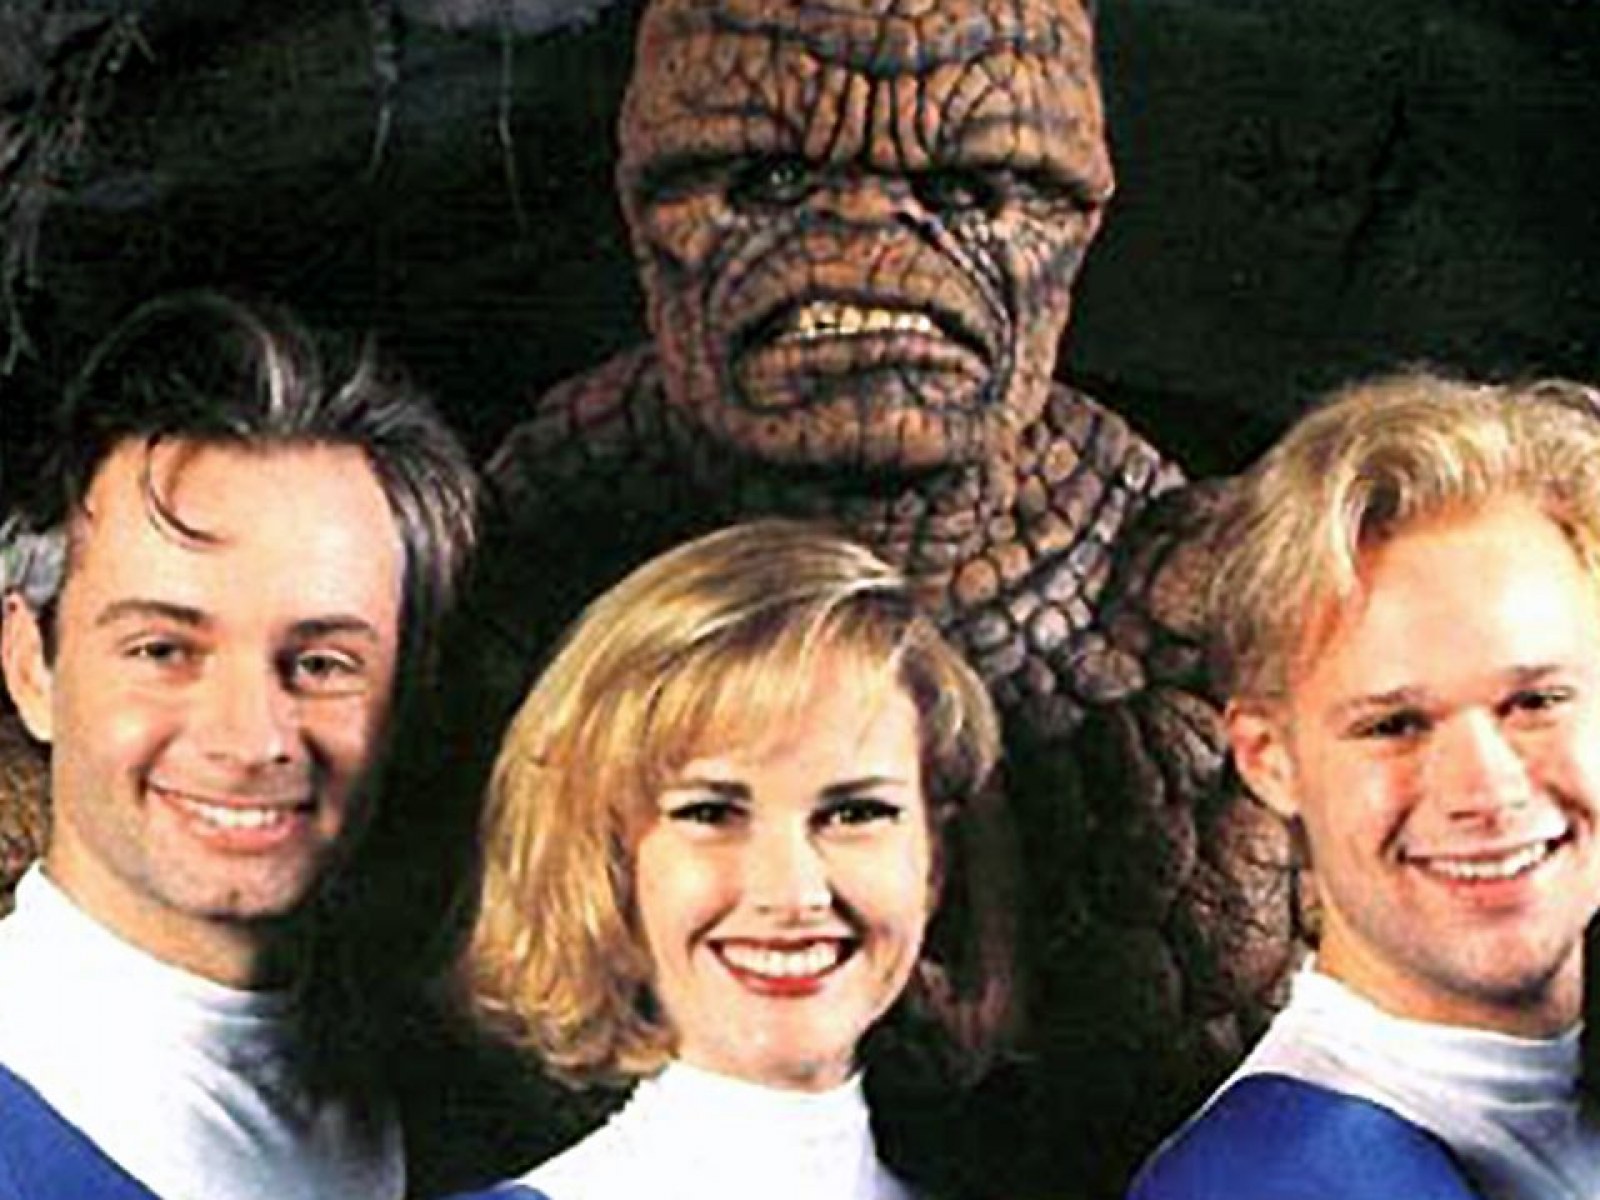 Fantastic Four (1994) Wallpapers